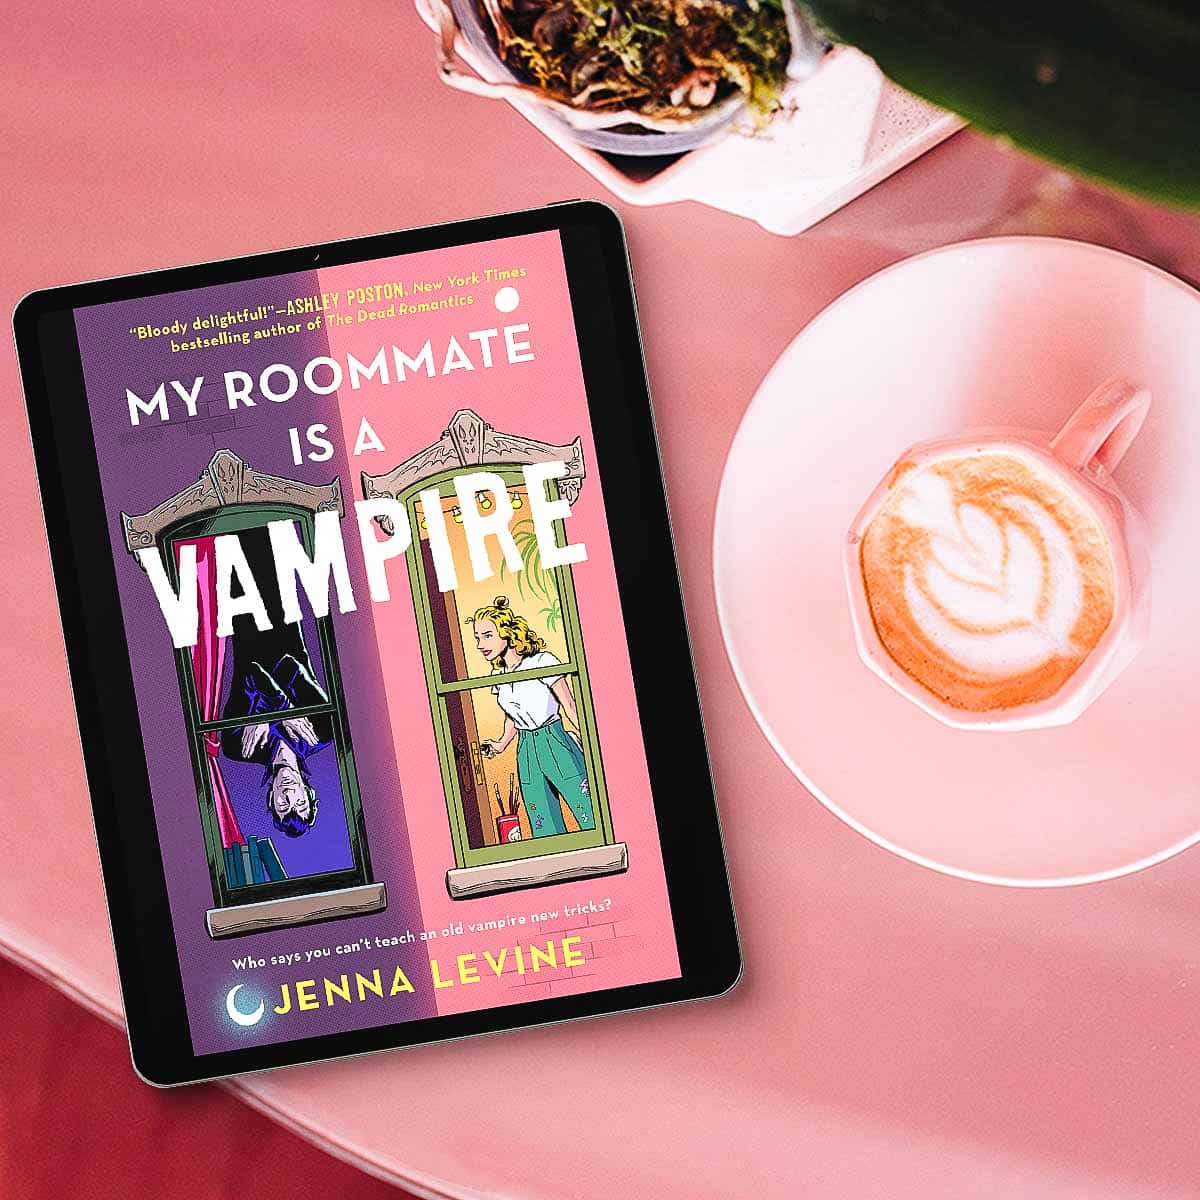 My Roommate is a Vampire by Jenna Levine – Review and Excerpt